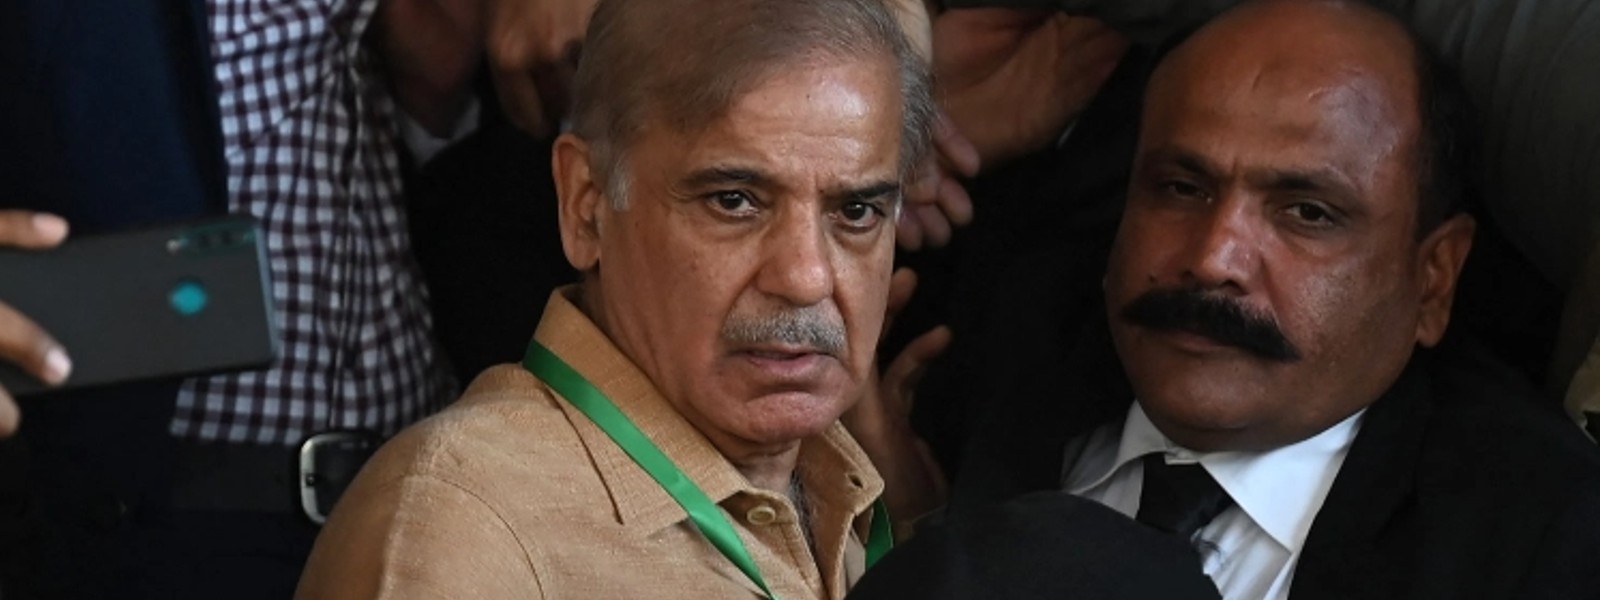 Pakistan’s Shehbaz Sharif submits nomination to become new PM